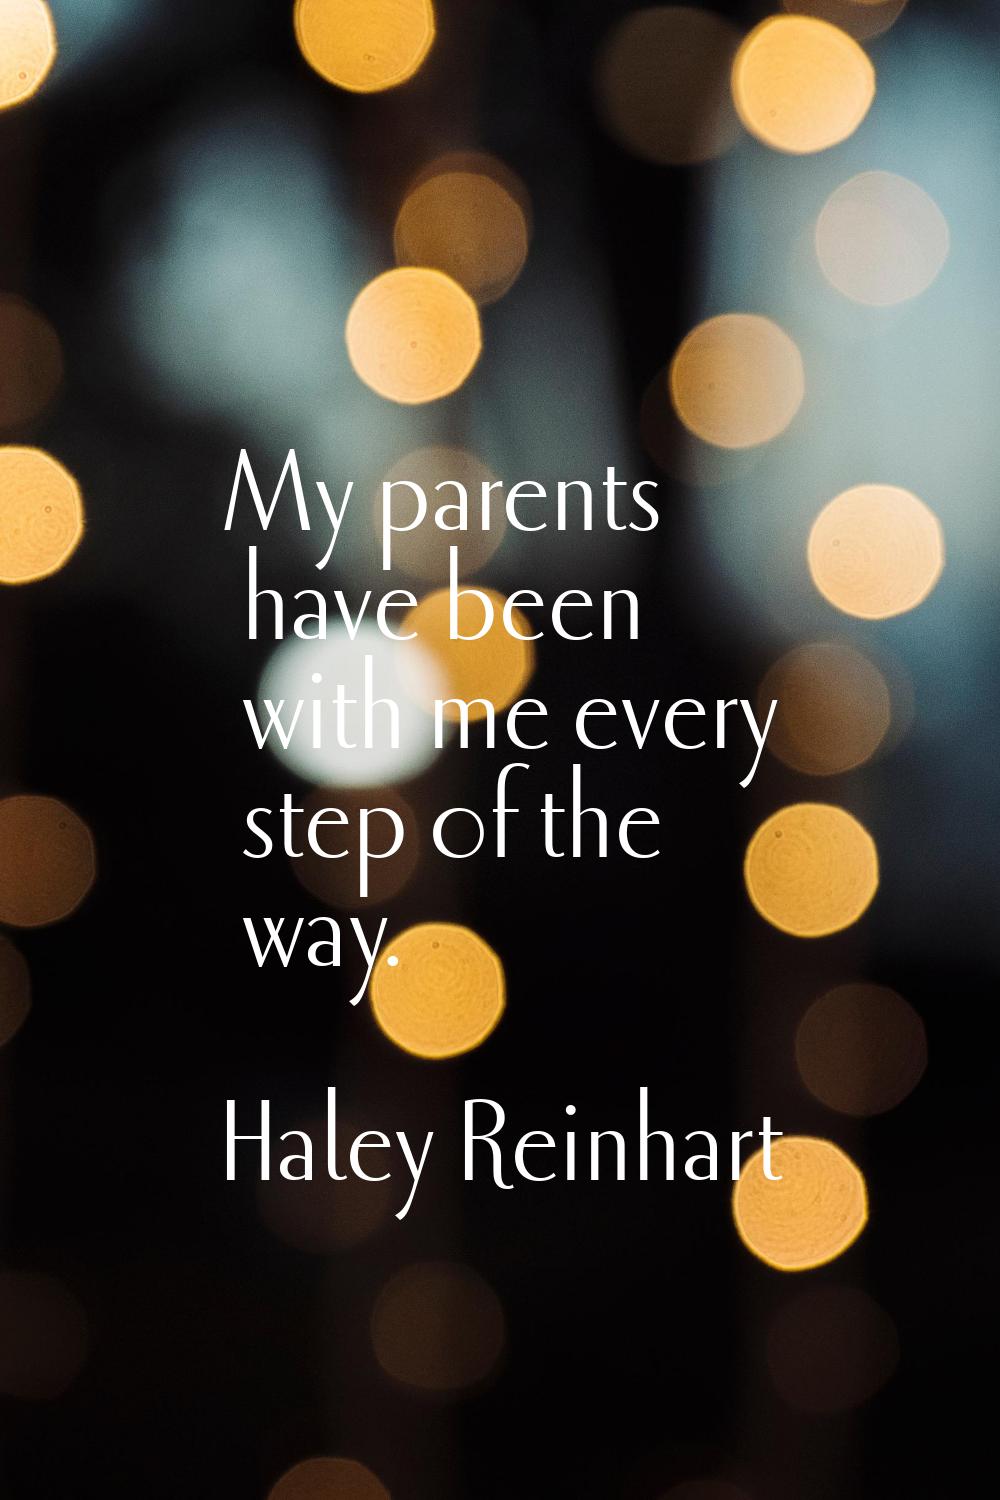 My parents have been with me every step of the way.